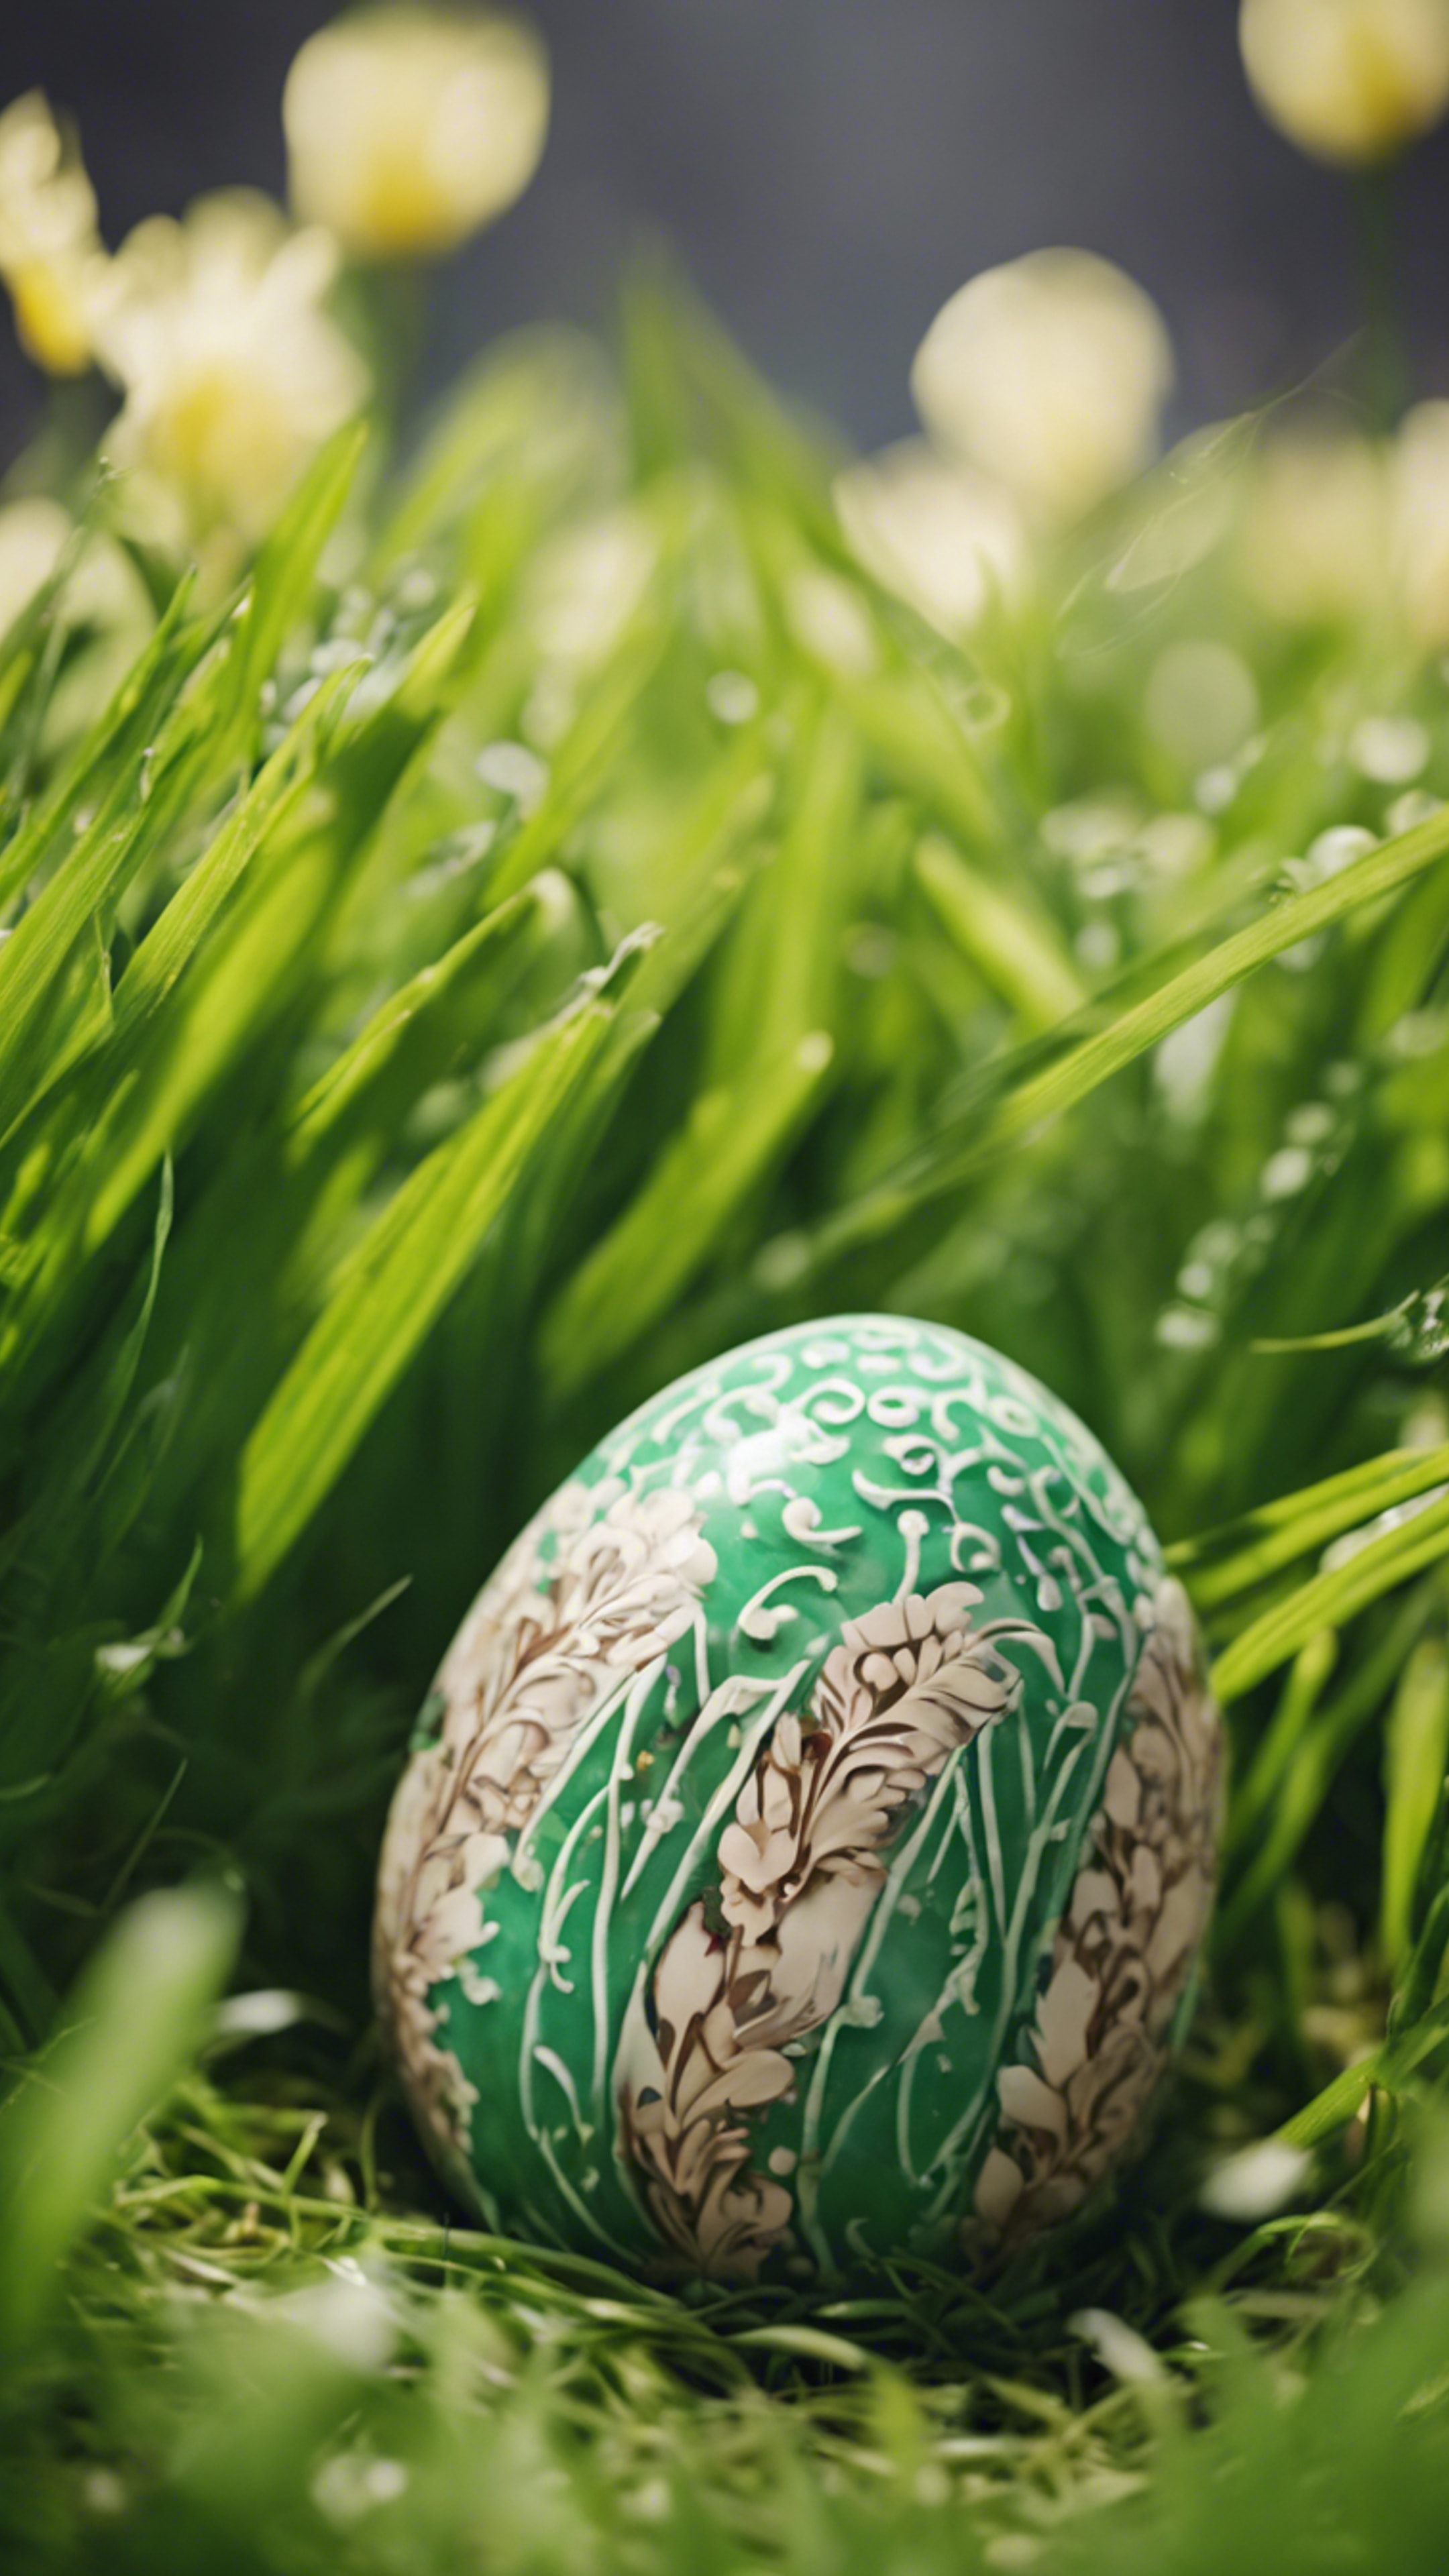 Close-up of a uniquely designed ceramic Easter egg sitting in bright green grass.壁紙[195425dd16be462f82eb]